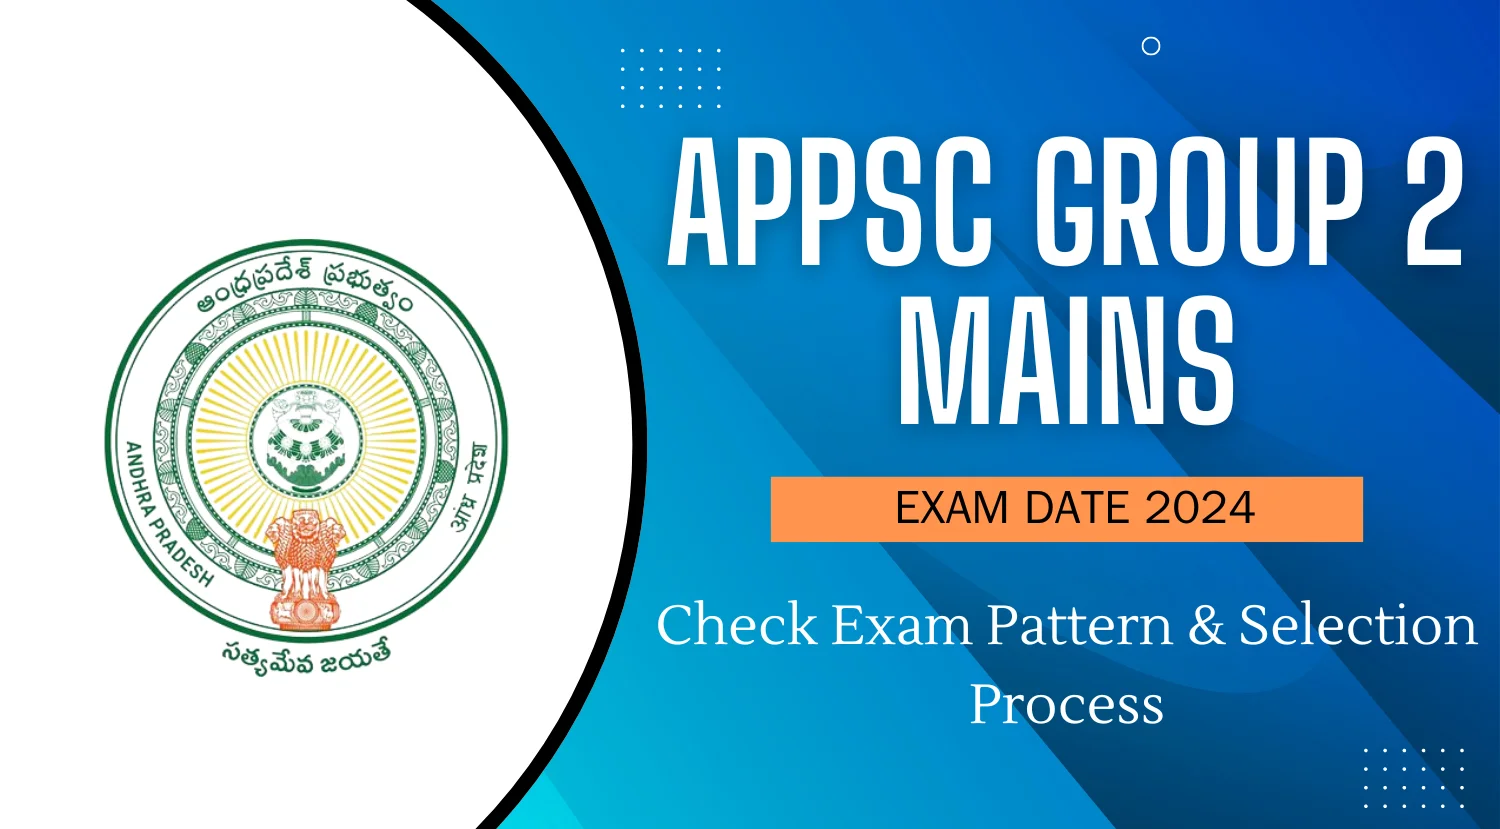 APPSC Group 2 Mains Exam Date 2024 Announced - Check Exam Pattern Selection Process